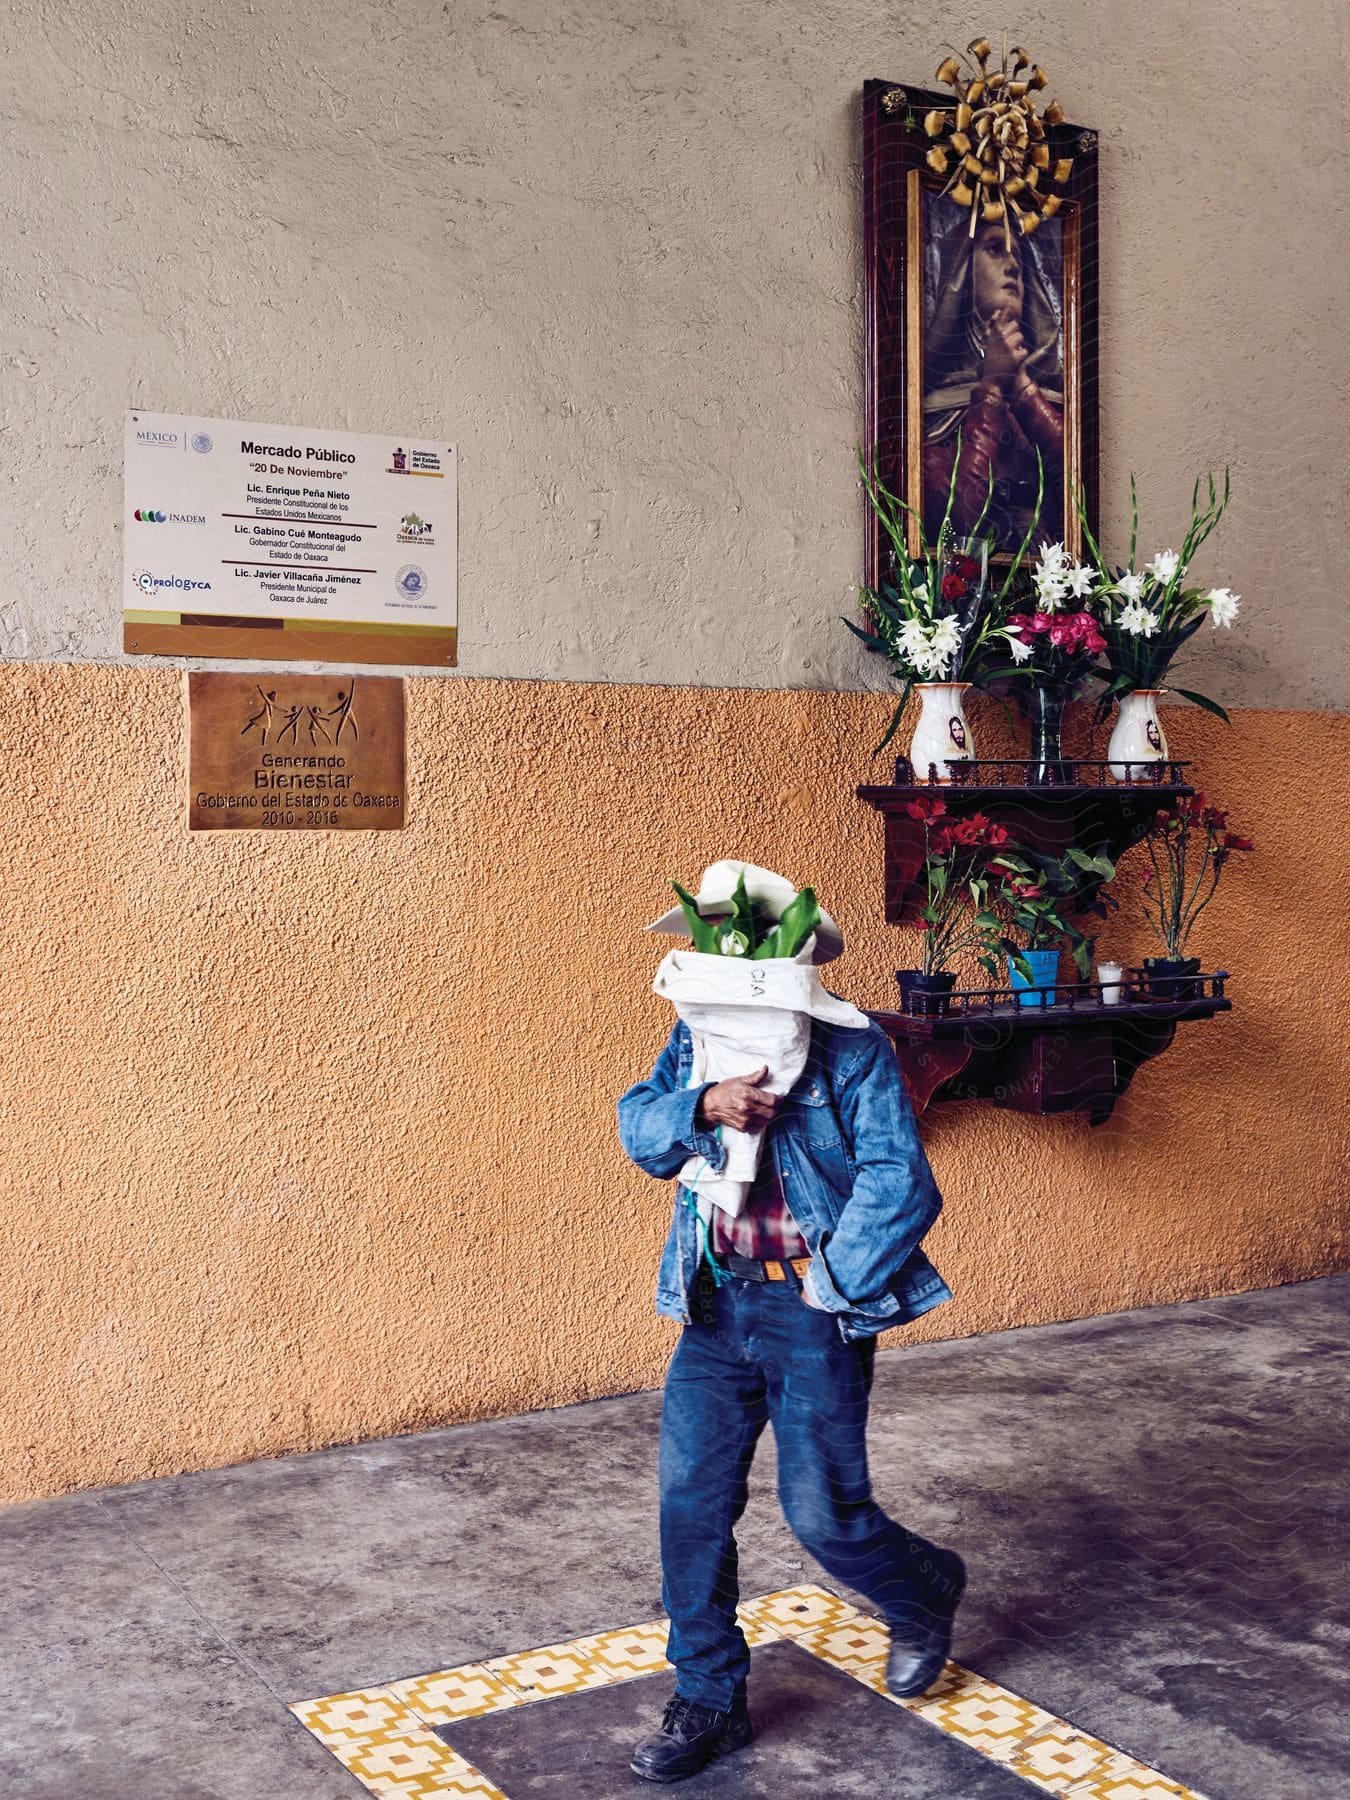 A man walking with flowers in front of his face